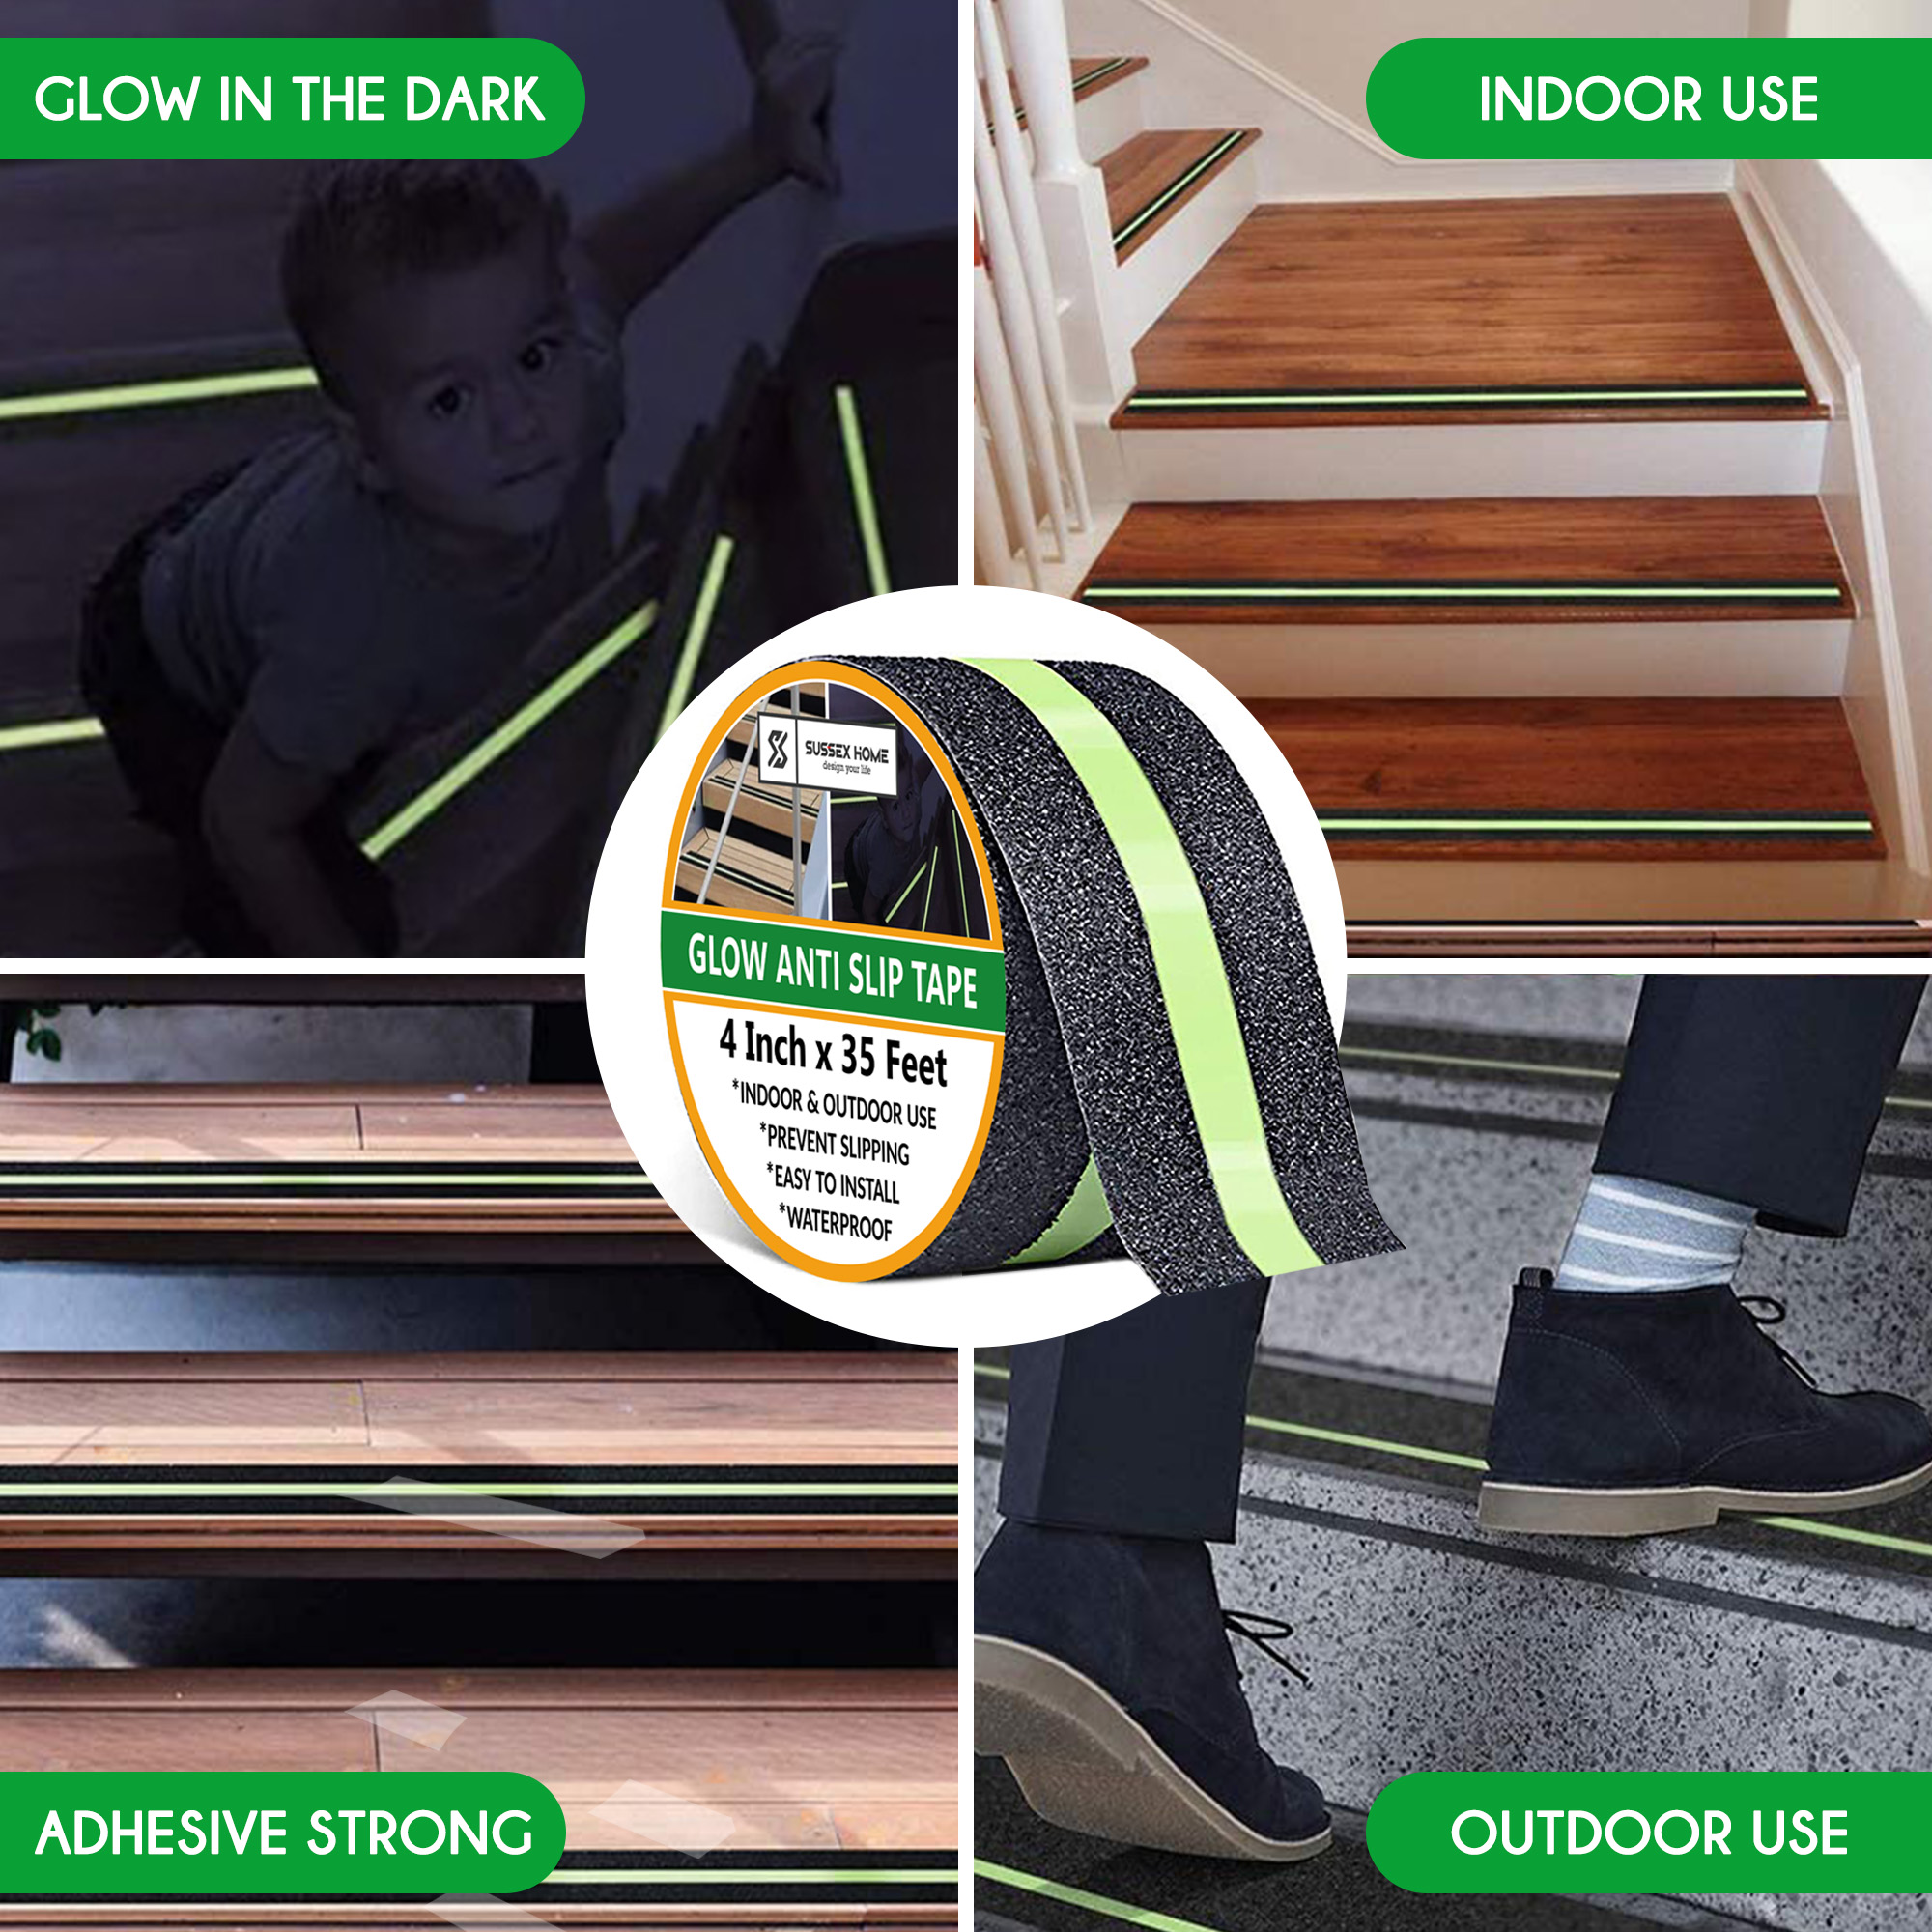 Sussexhome Non-Slip Glow In The Dark Tape - Heavy Duty Grip Tape For Stairs - Waterproof Safety Anti Slip Tape - 4"X35' Roll, Glow